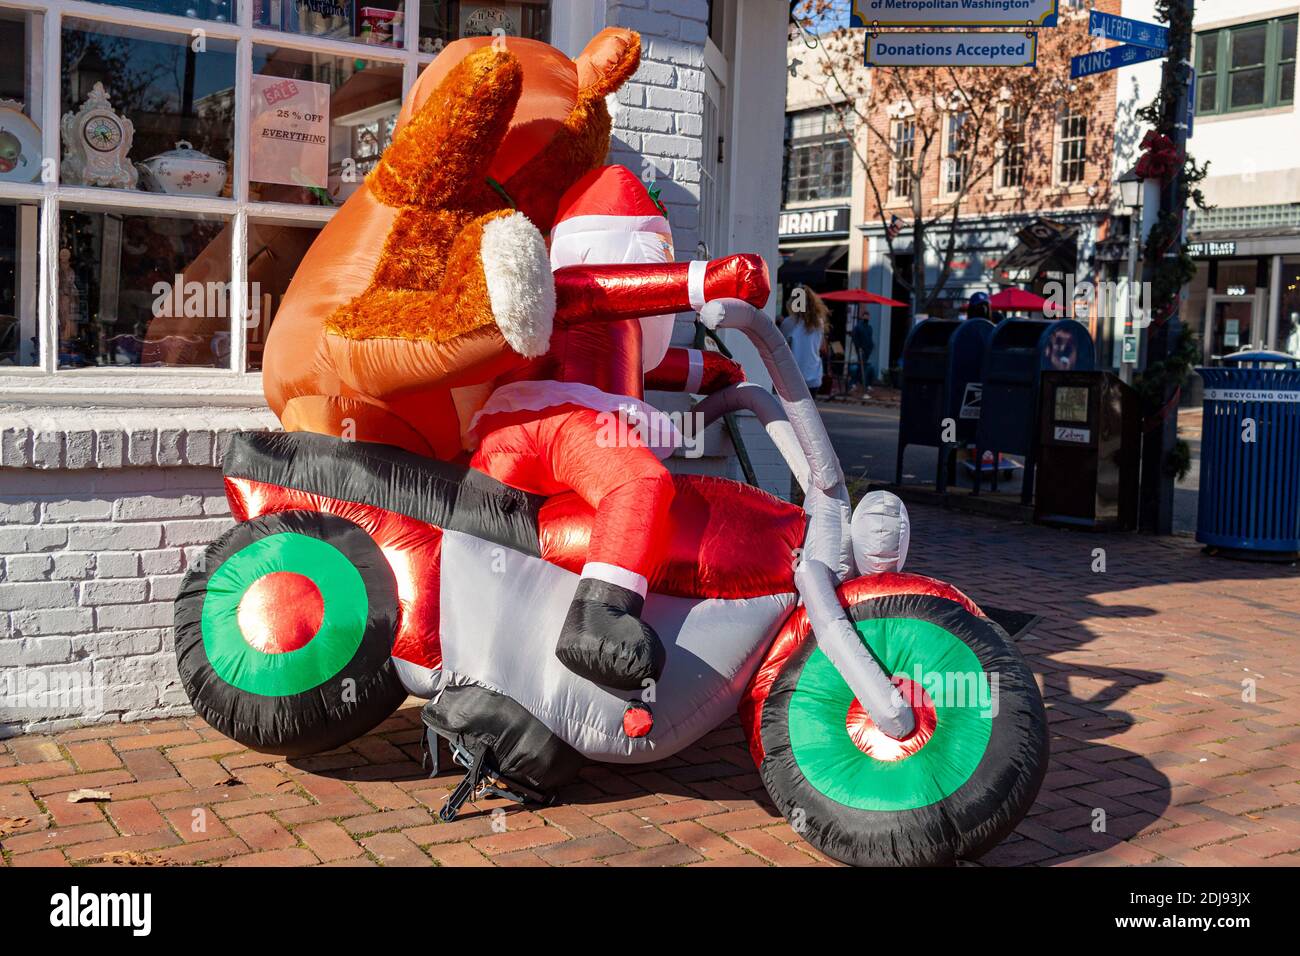 Alexandria, VA, USA 11-28-2020:  a creative Christmas decor in front of a gift shop featuring a big inflatable Santa Claus toy riding on a motorbike w Stock Photo